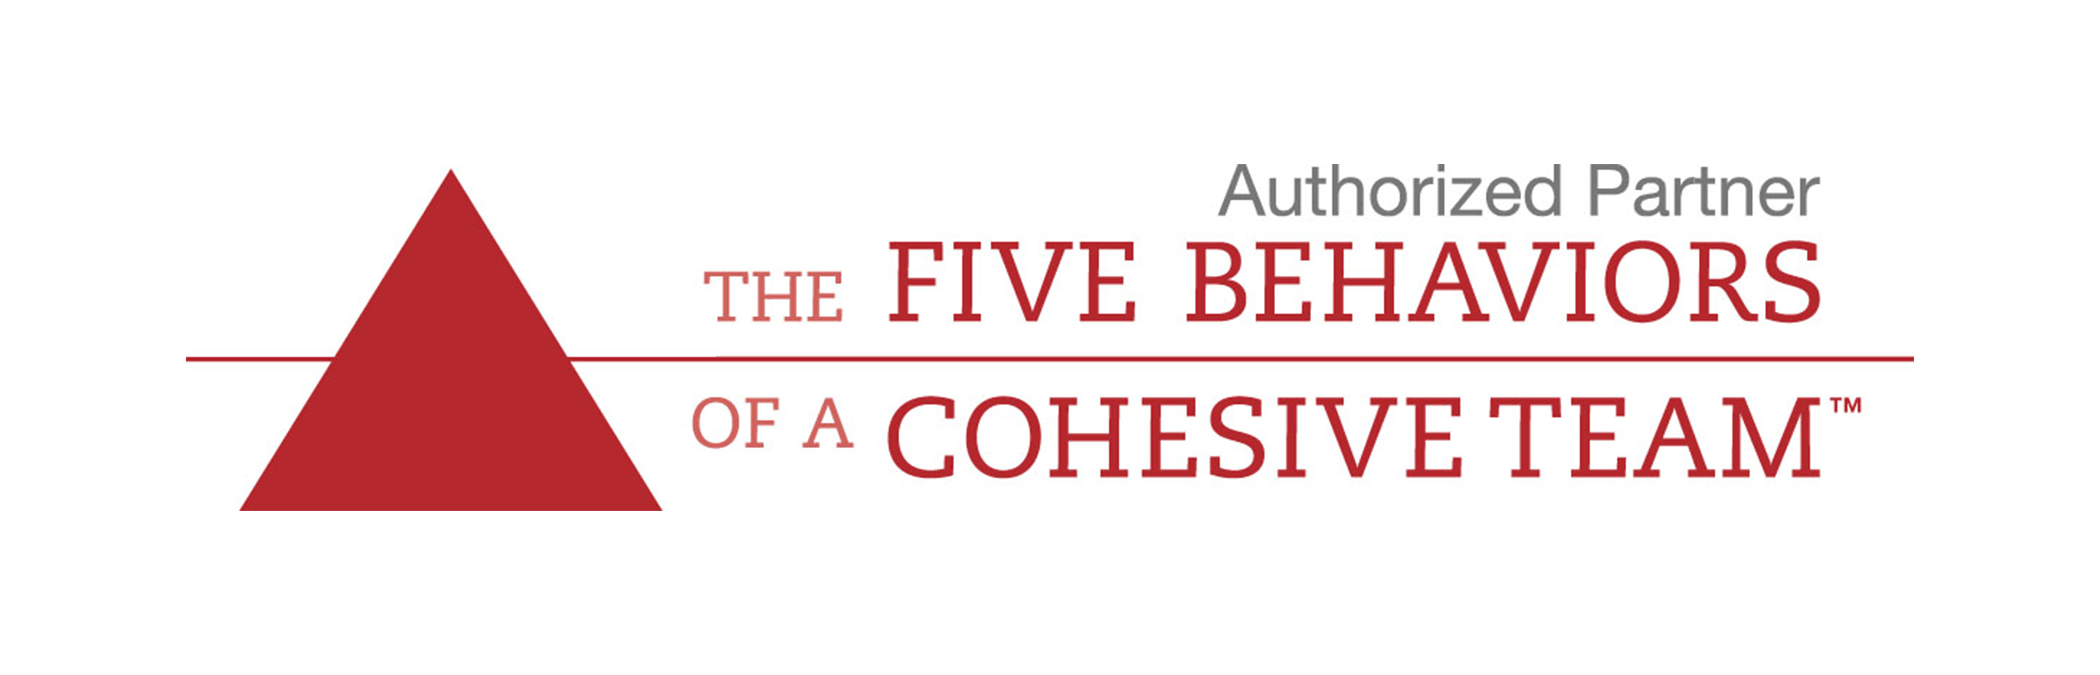 The Five Behaviors of a Cohesive Team Certification